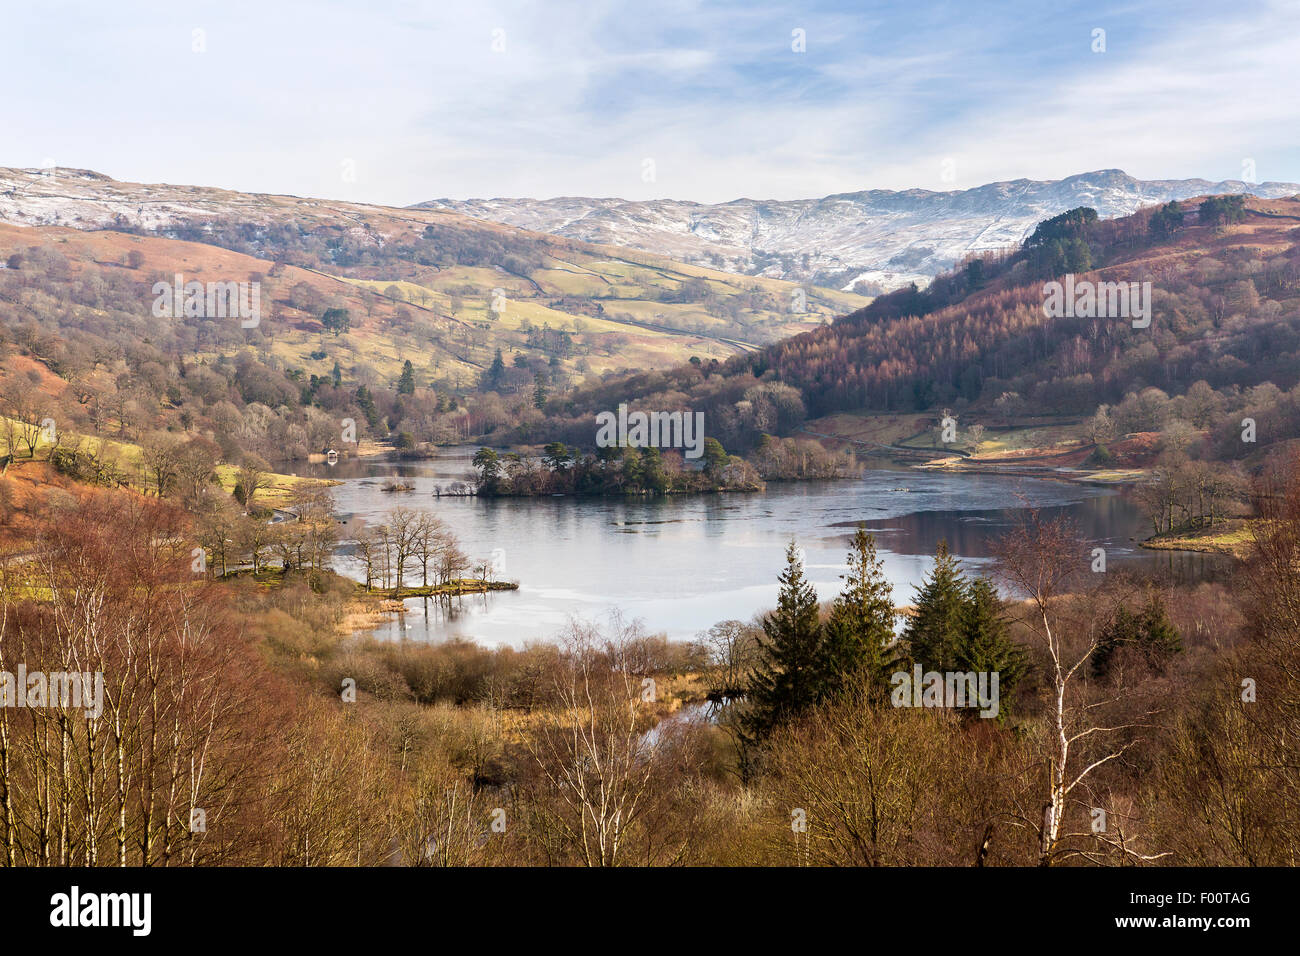 A view over Rydal Water from White Moss Common, Lake District National Park, Cumbria, England, United Kingdom, Europe. Stock Photo